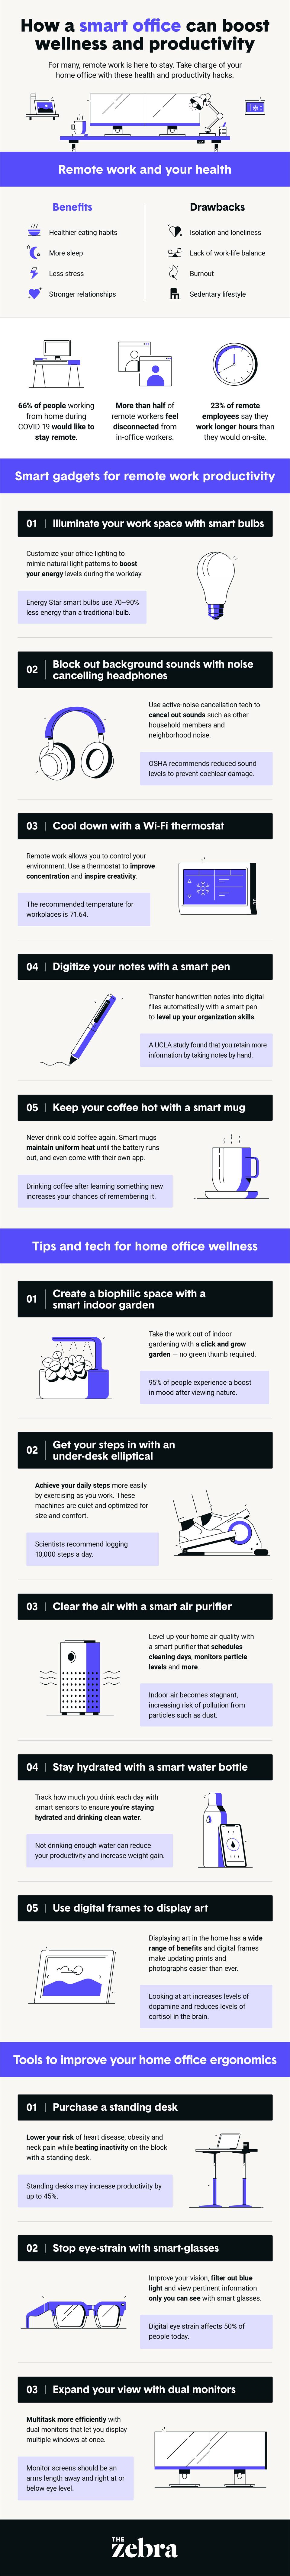 Top 15 Home Office Gadgets to Increase Productivity